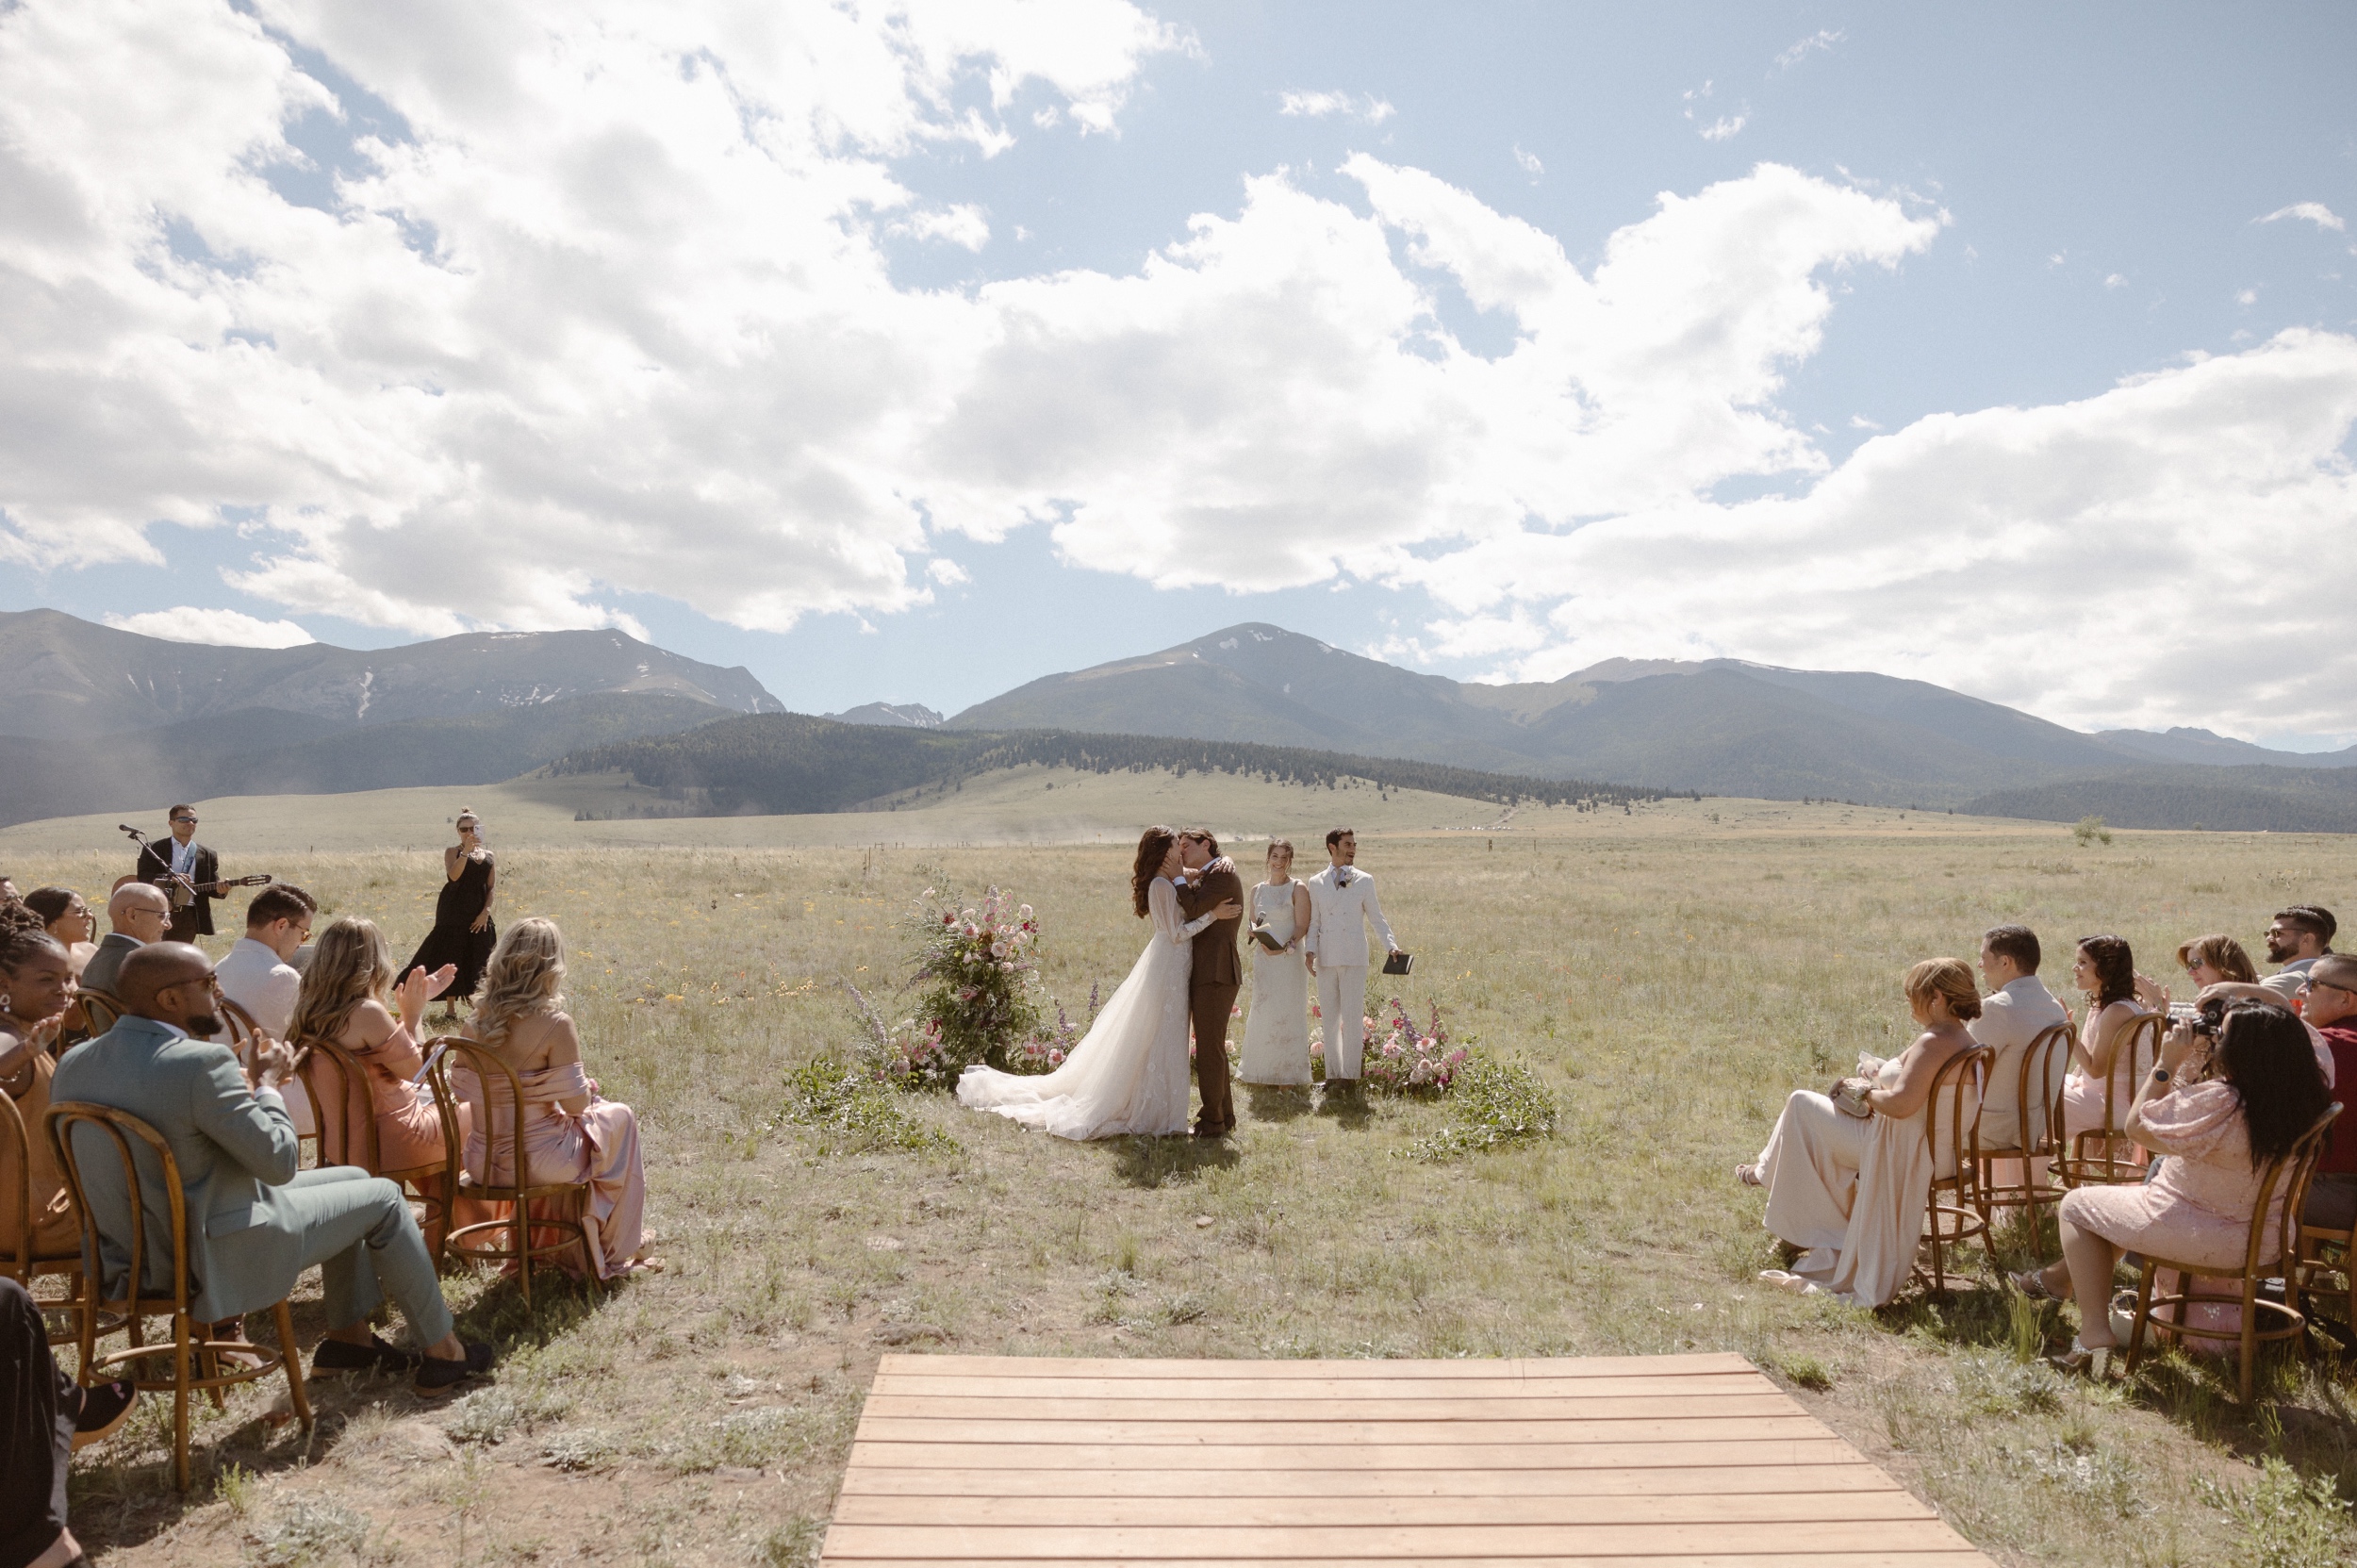 A bride and groom kiss one another after their wedding ceremony in a grassy field with mountains in the background. Photo by Ashley Joyce.